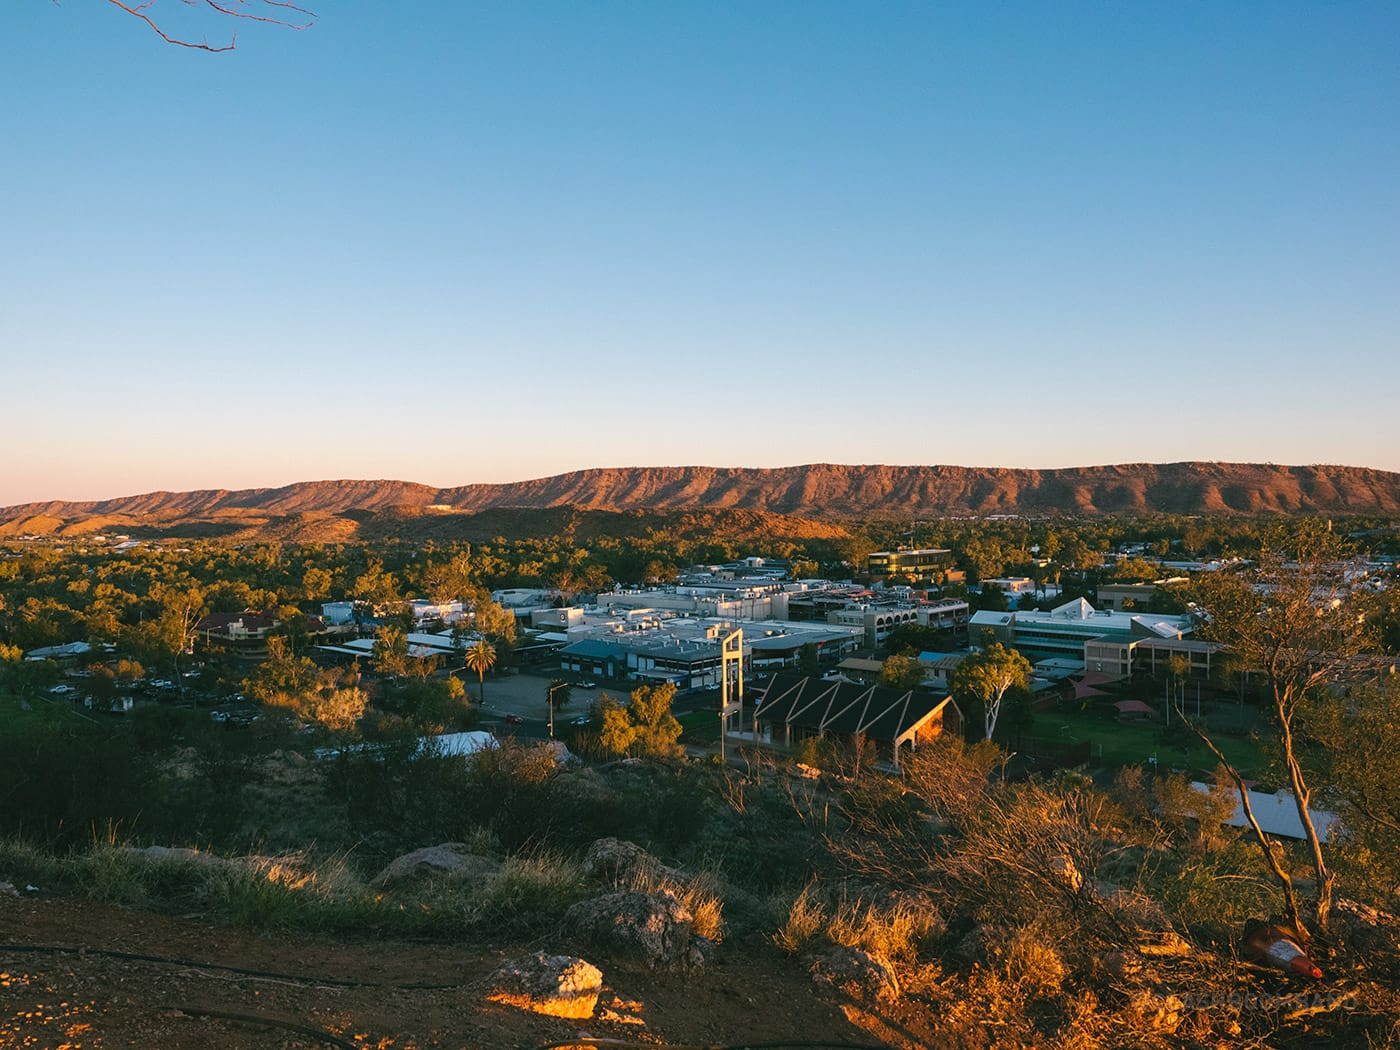 NT Australia - Alice Springs - Anzac Hill during sunset